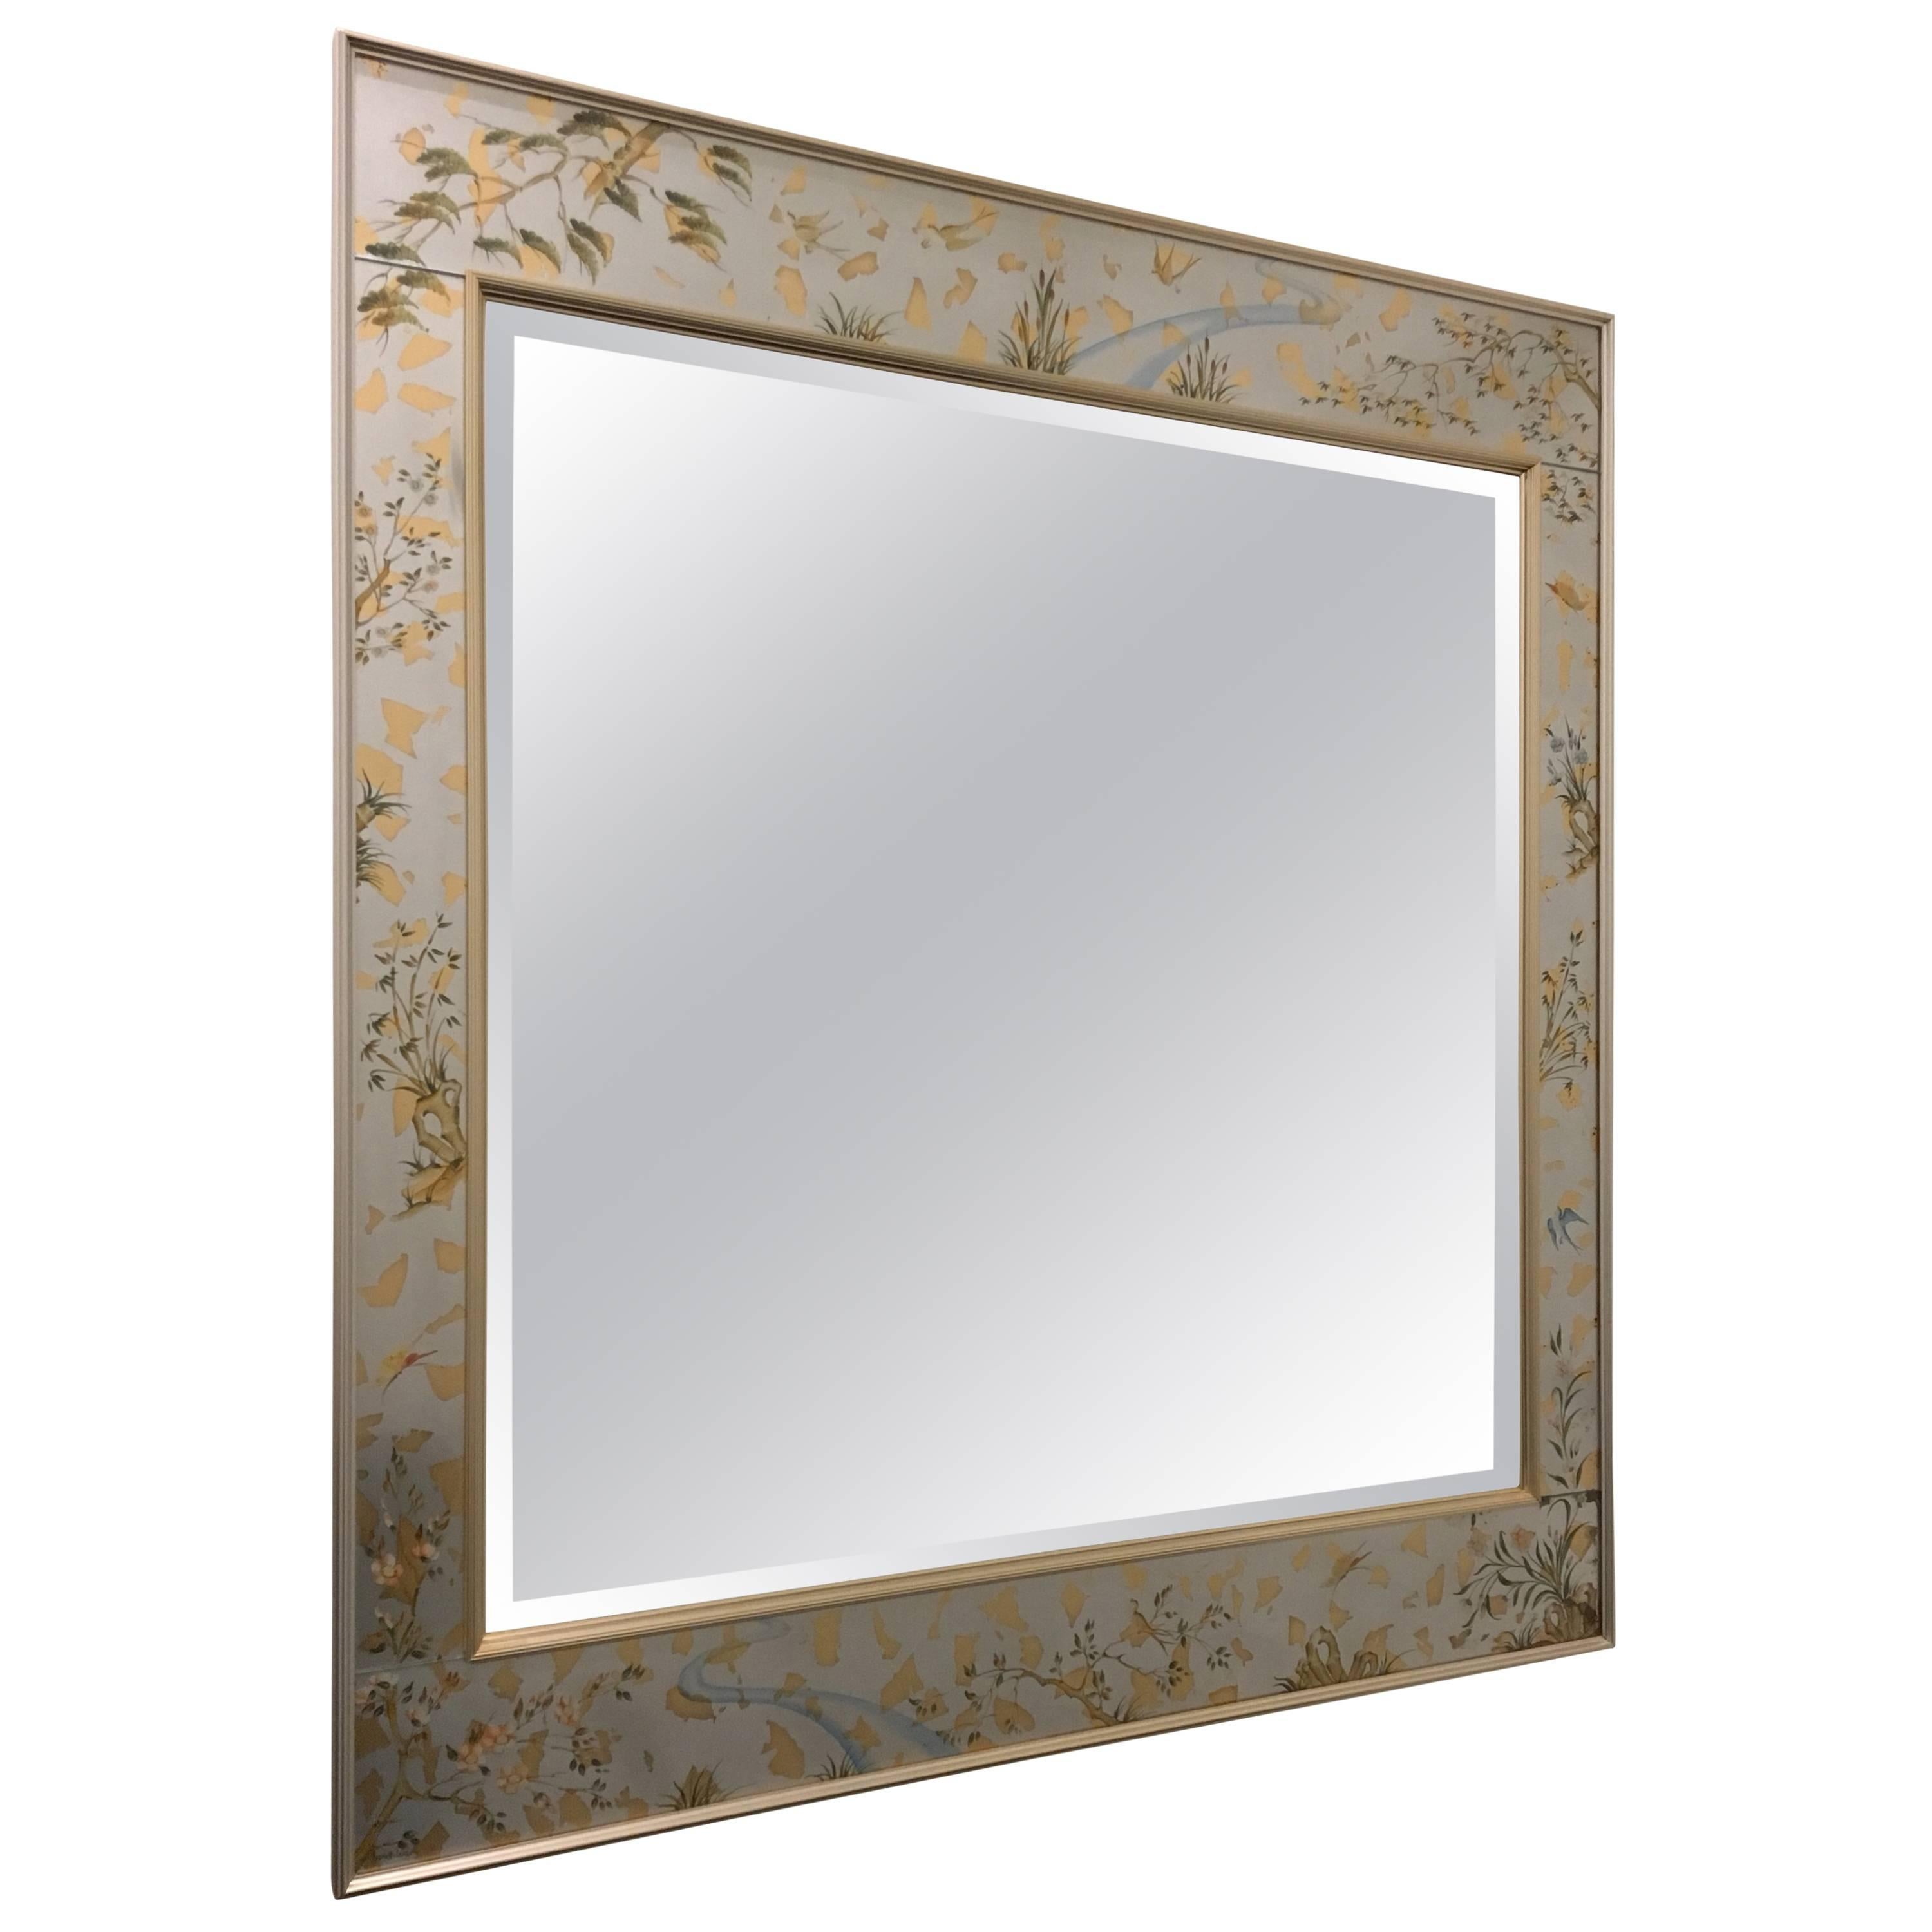 1980s Large Silver Chinoiserie Beveled Mirror by La Barge